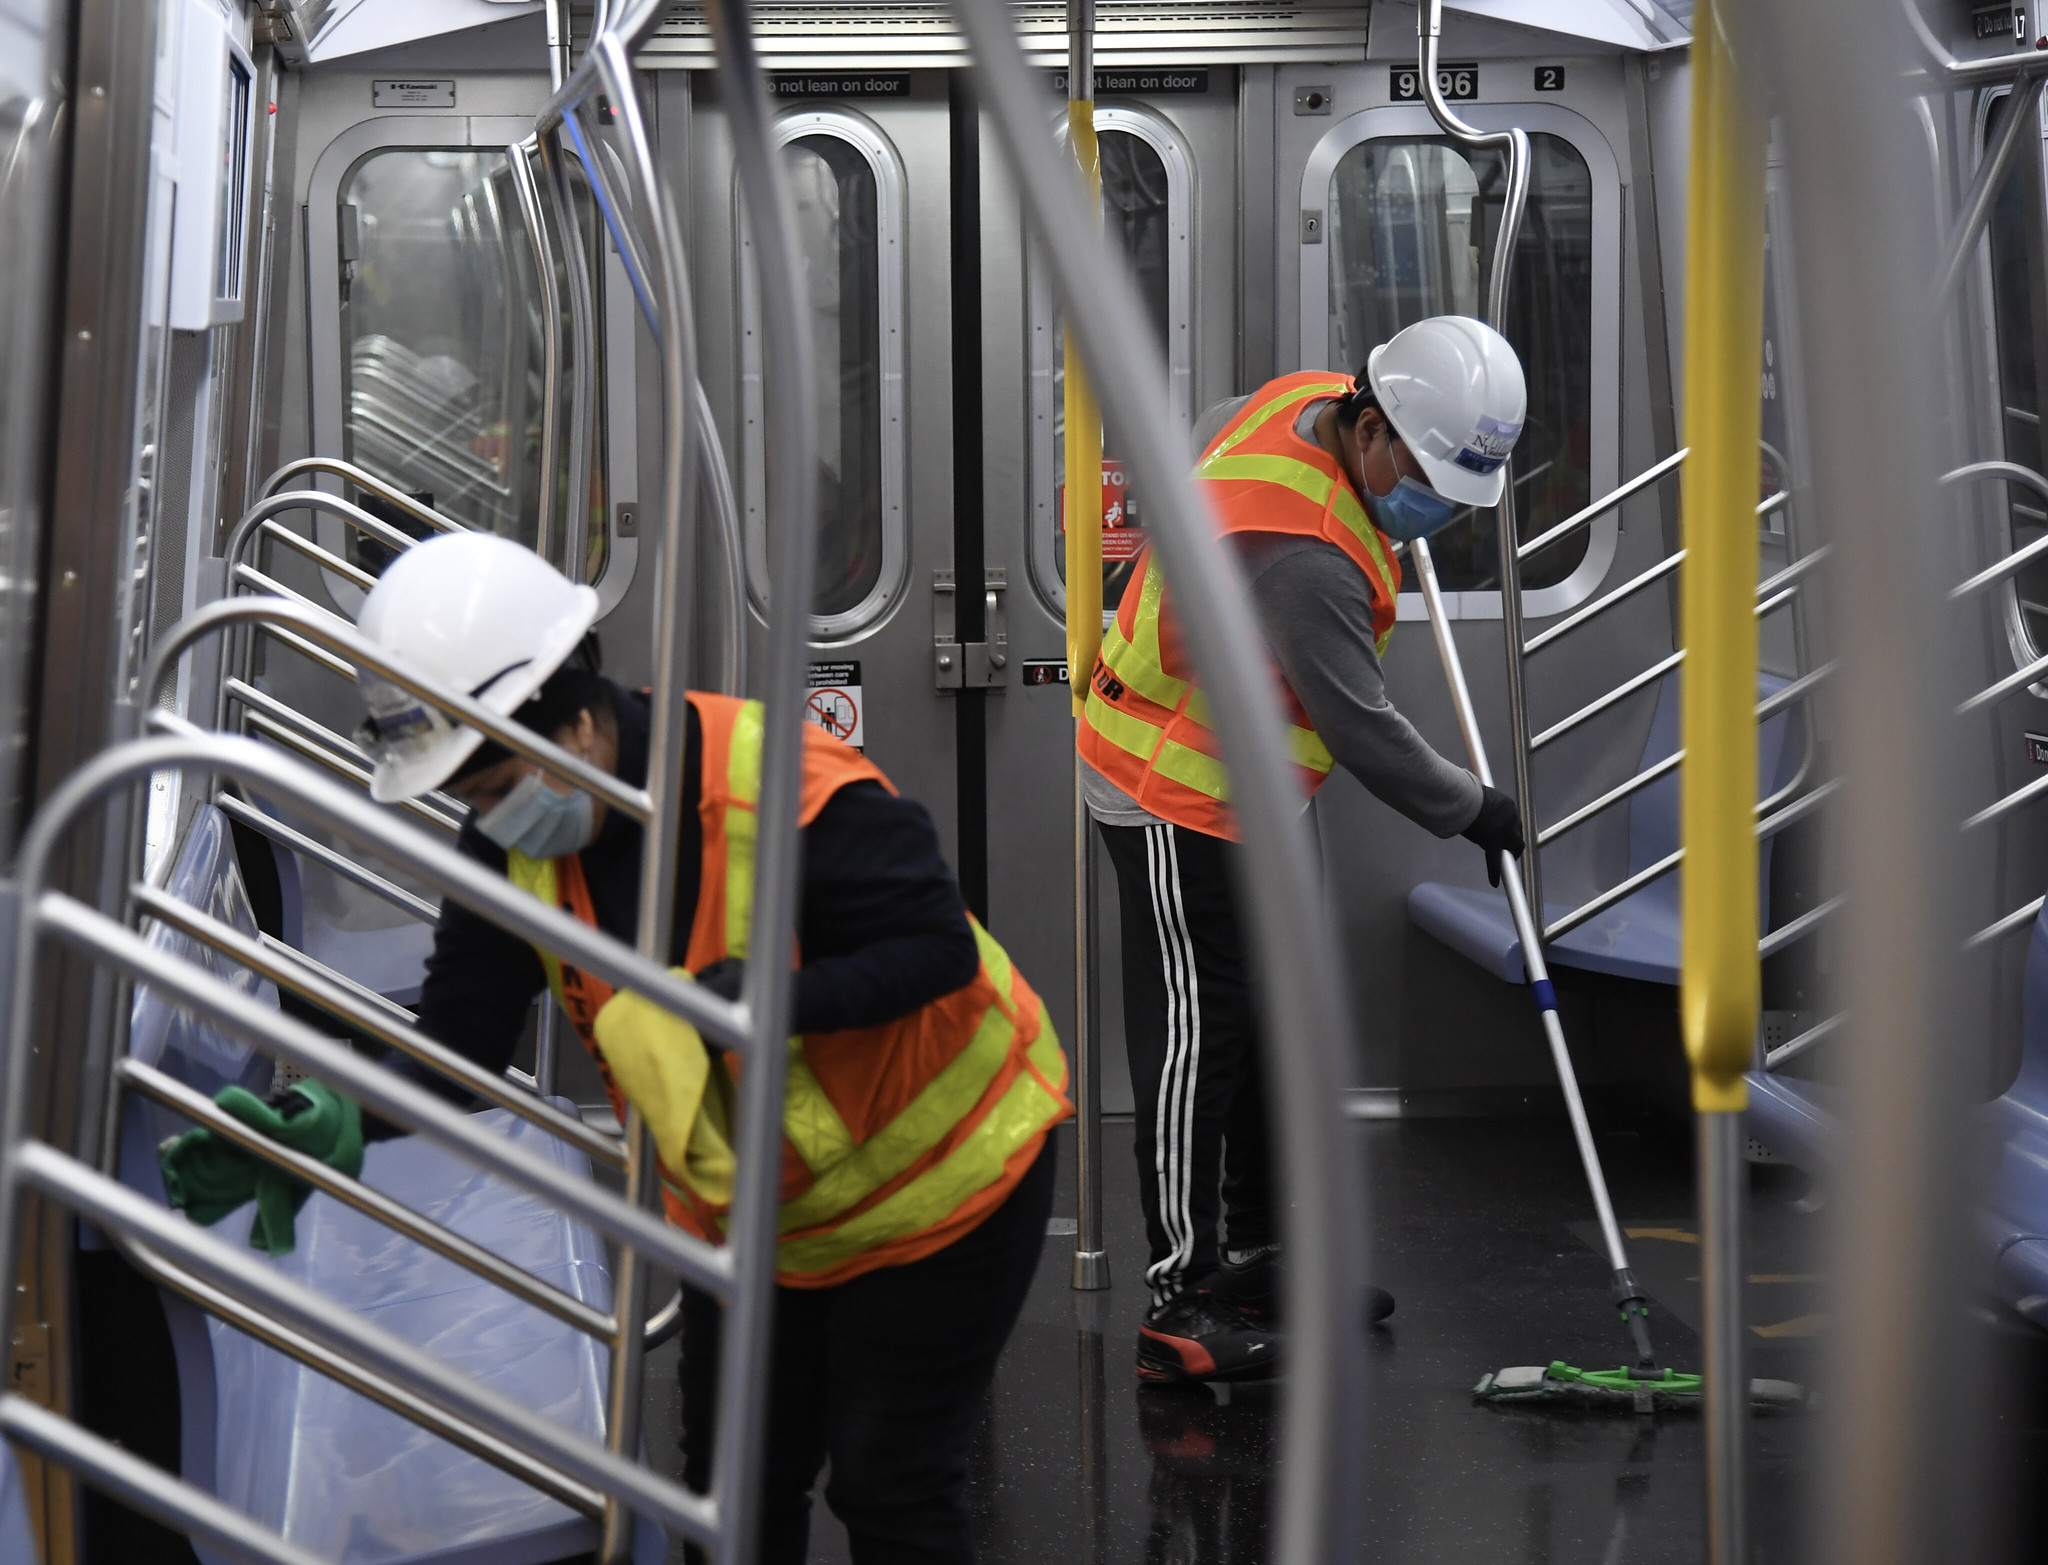 MTA crews perform overnight subway cleaning